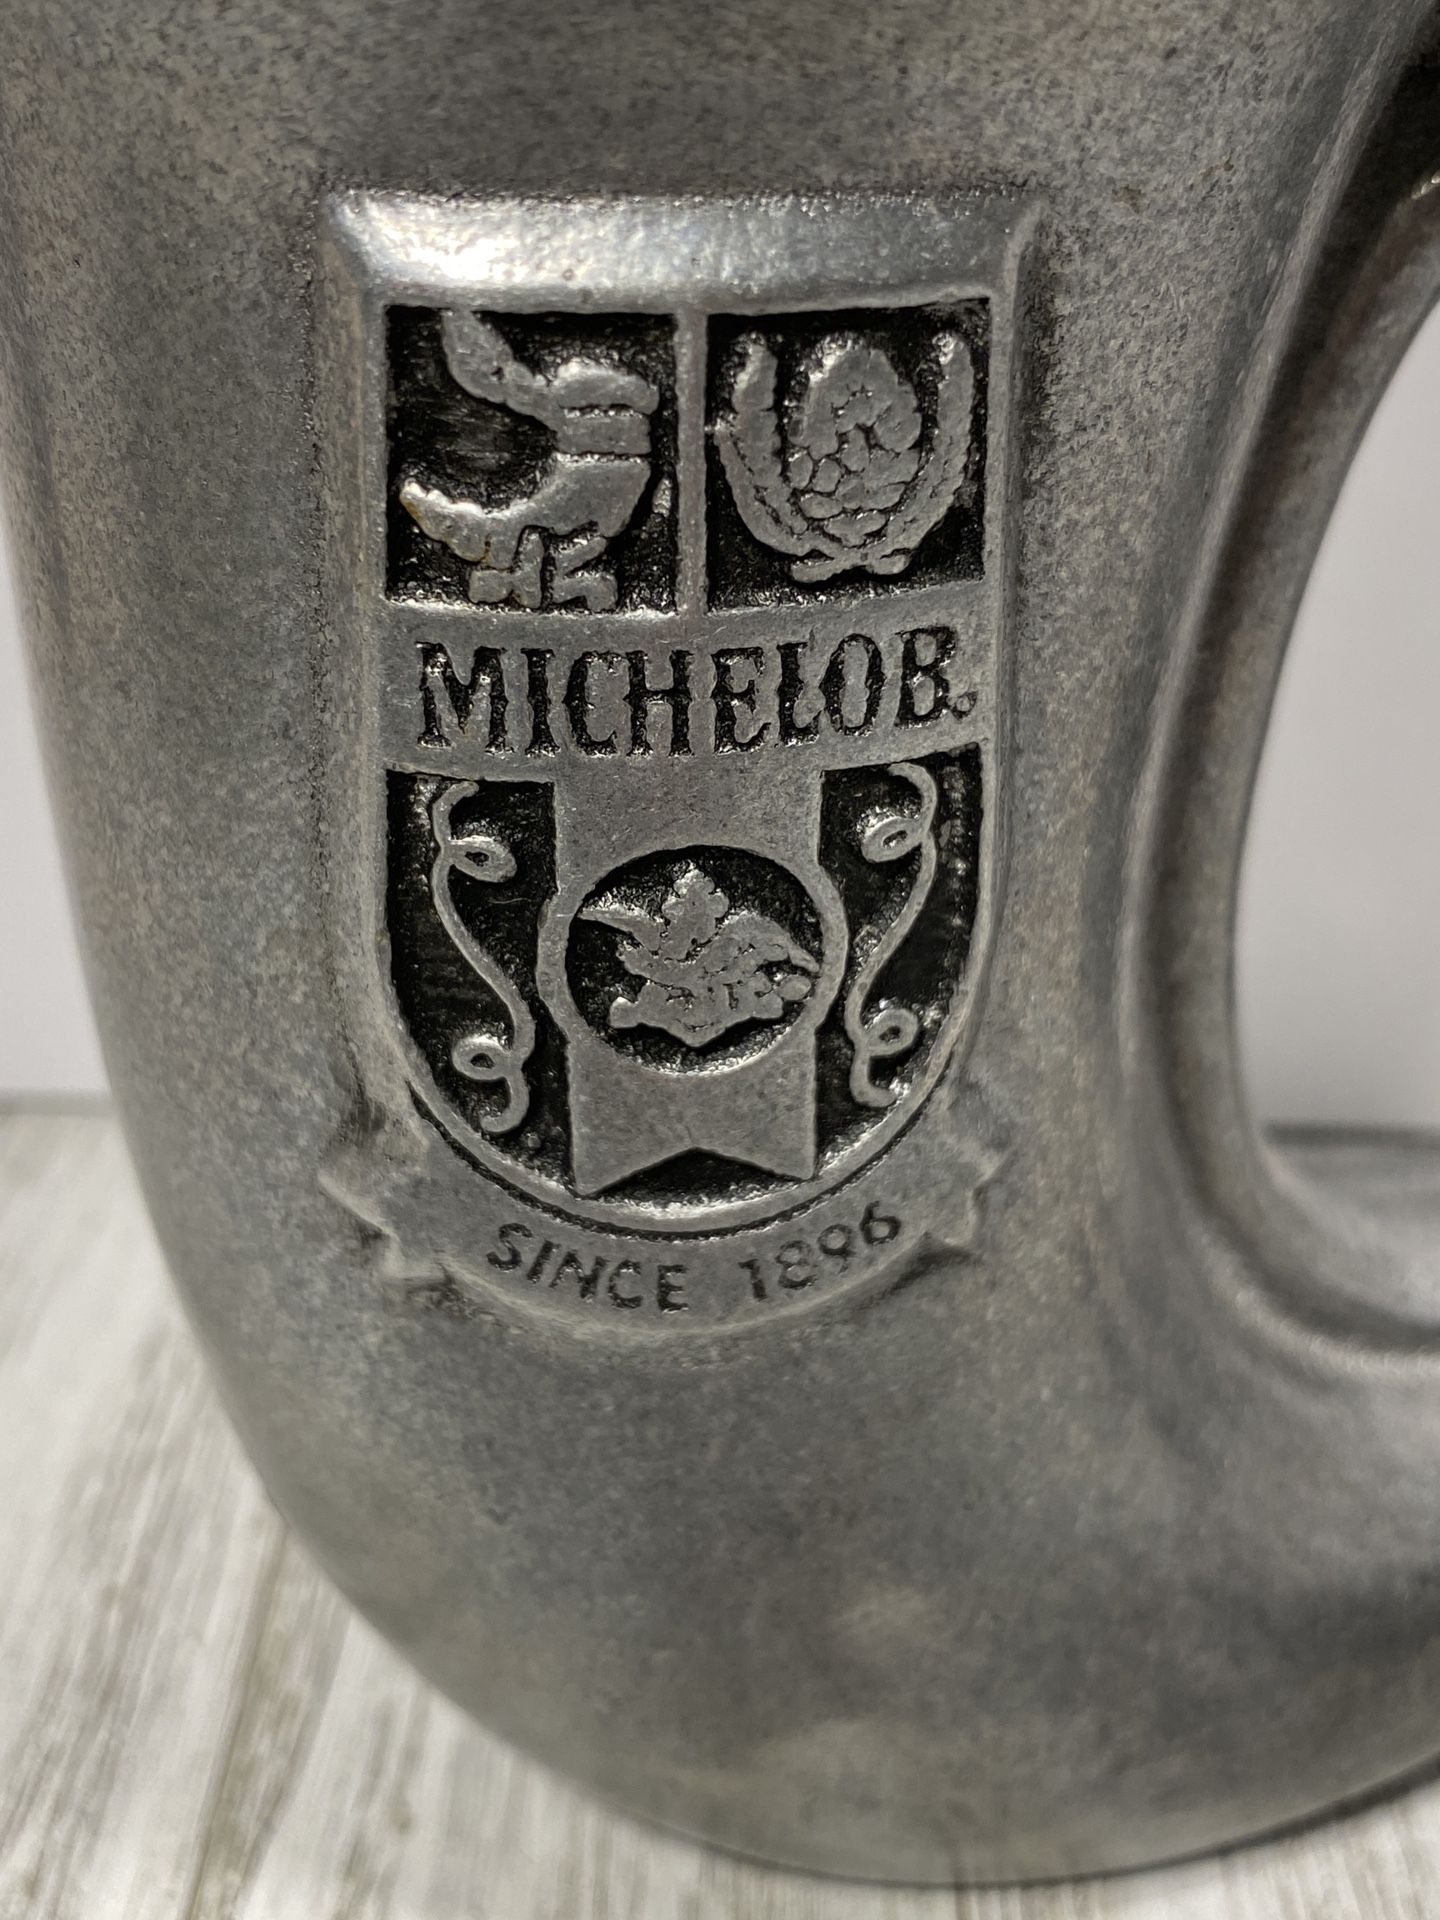 Michelob Pewter Beer Stein / Mug Horn Shaped